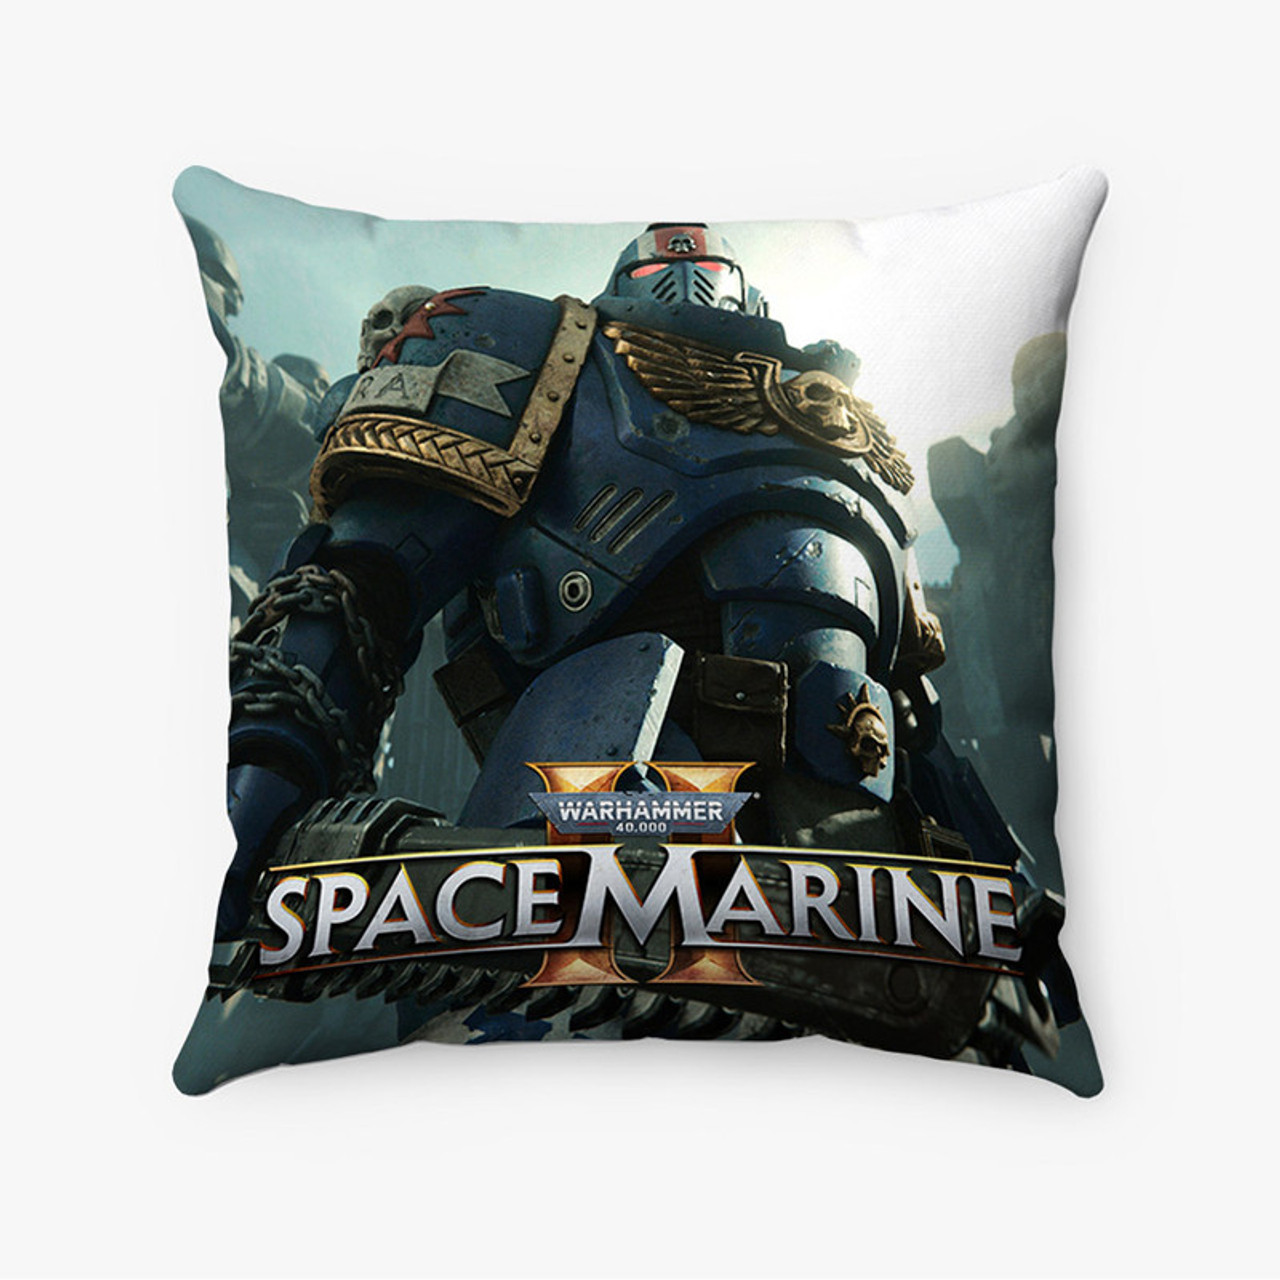 https://cdn11.bigcommerce.com/s-xhmrmcecz5/images/stencil/1280x1280/products/201808/207168/Warhammer-40-K-Space-Marine-Custom-Pillow-Case__00913.1673681548.jpg?c=1